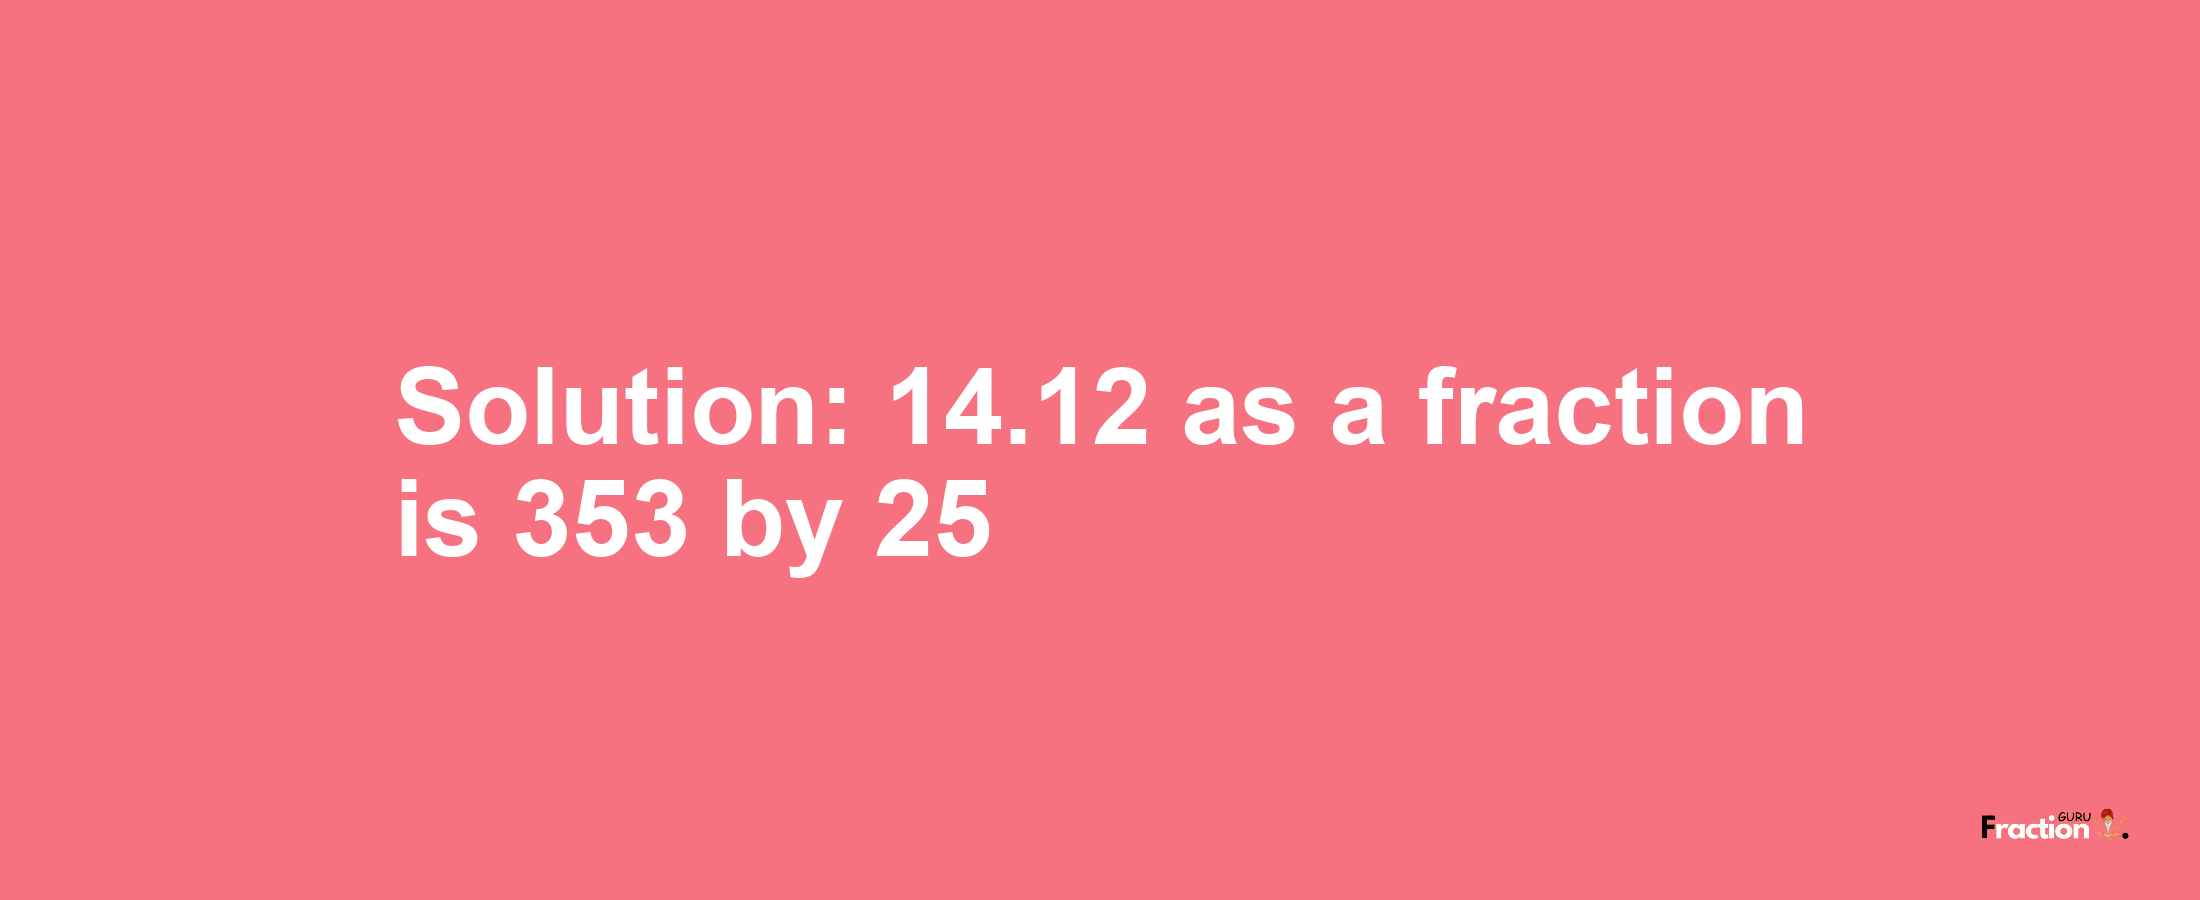 Solution:14.12 as a fraction is 353/25